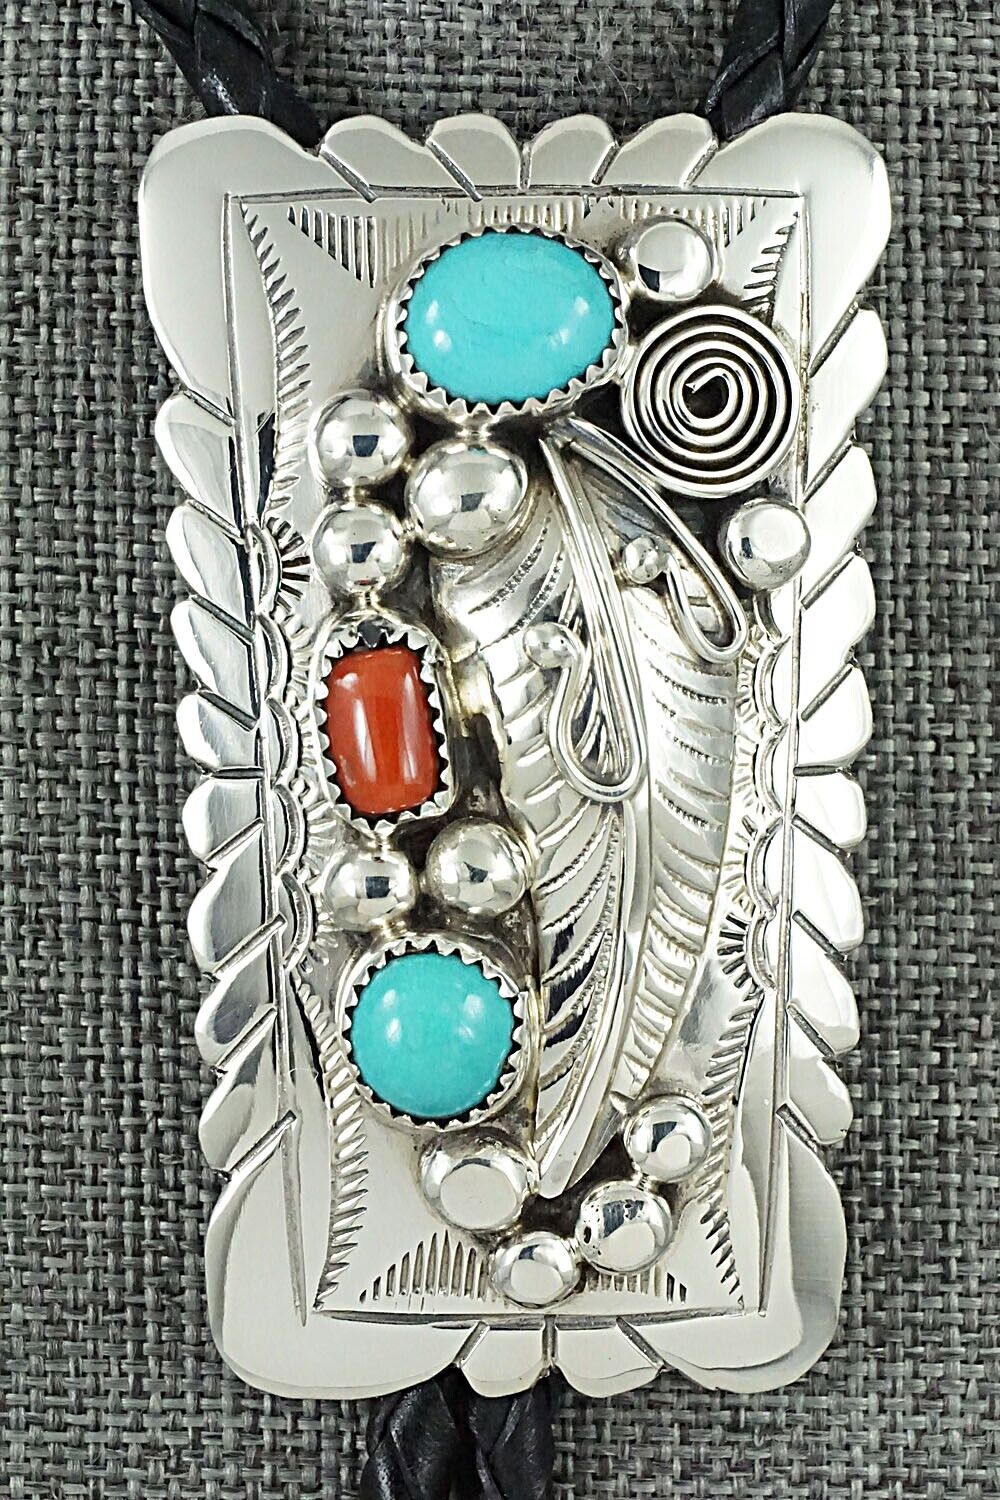 Turquoise, Coral & Sterling Silver Bolo Tie - Wilbur Myers